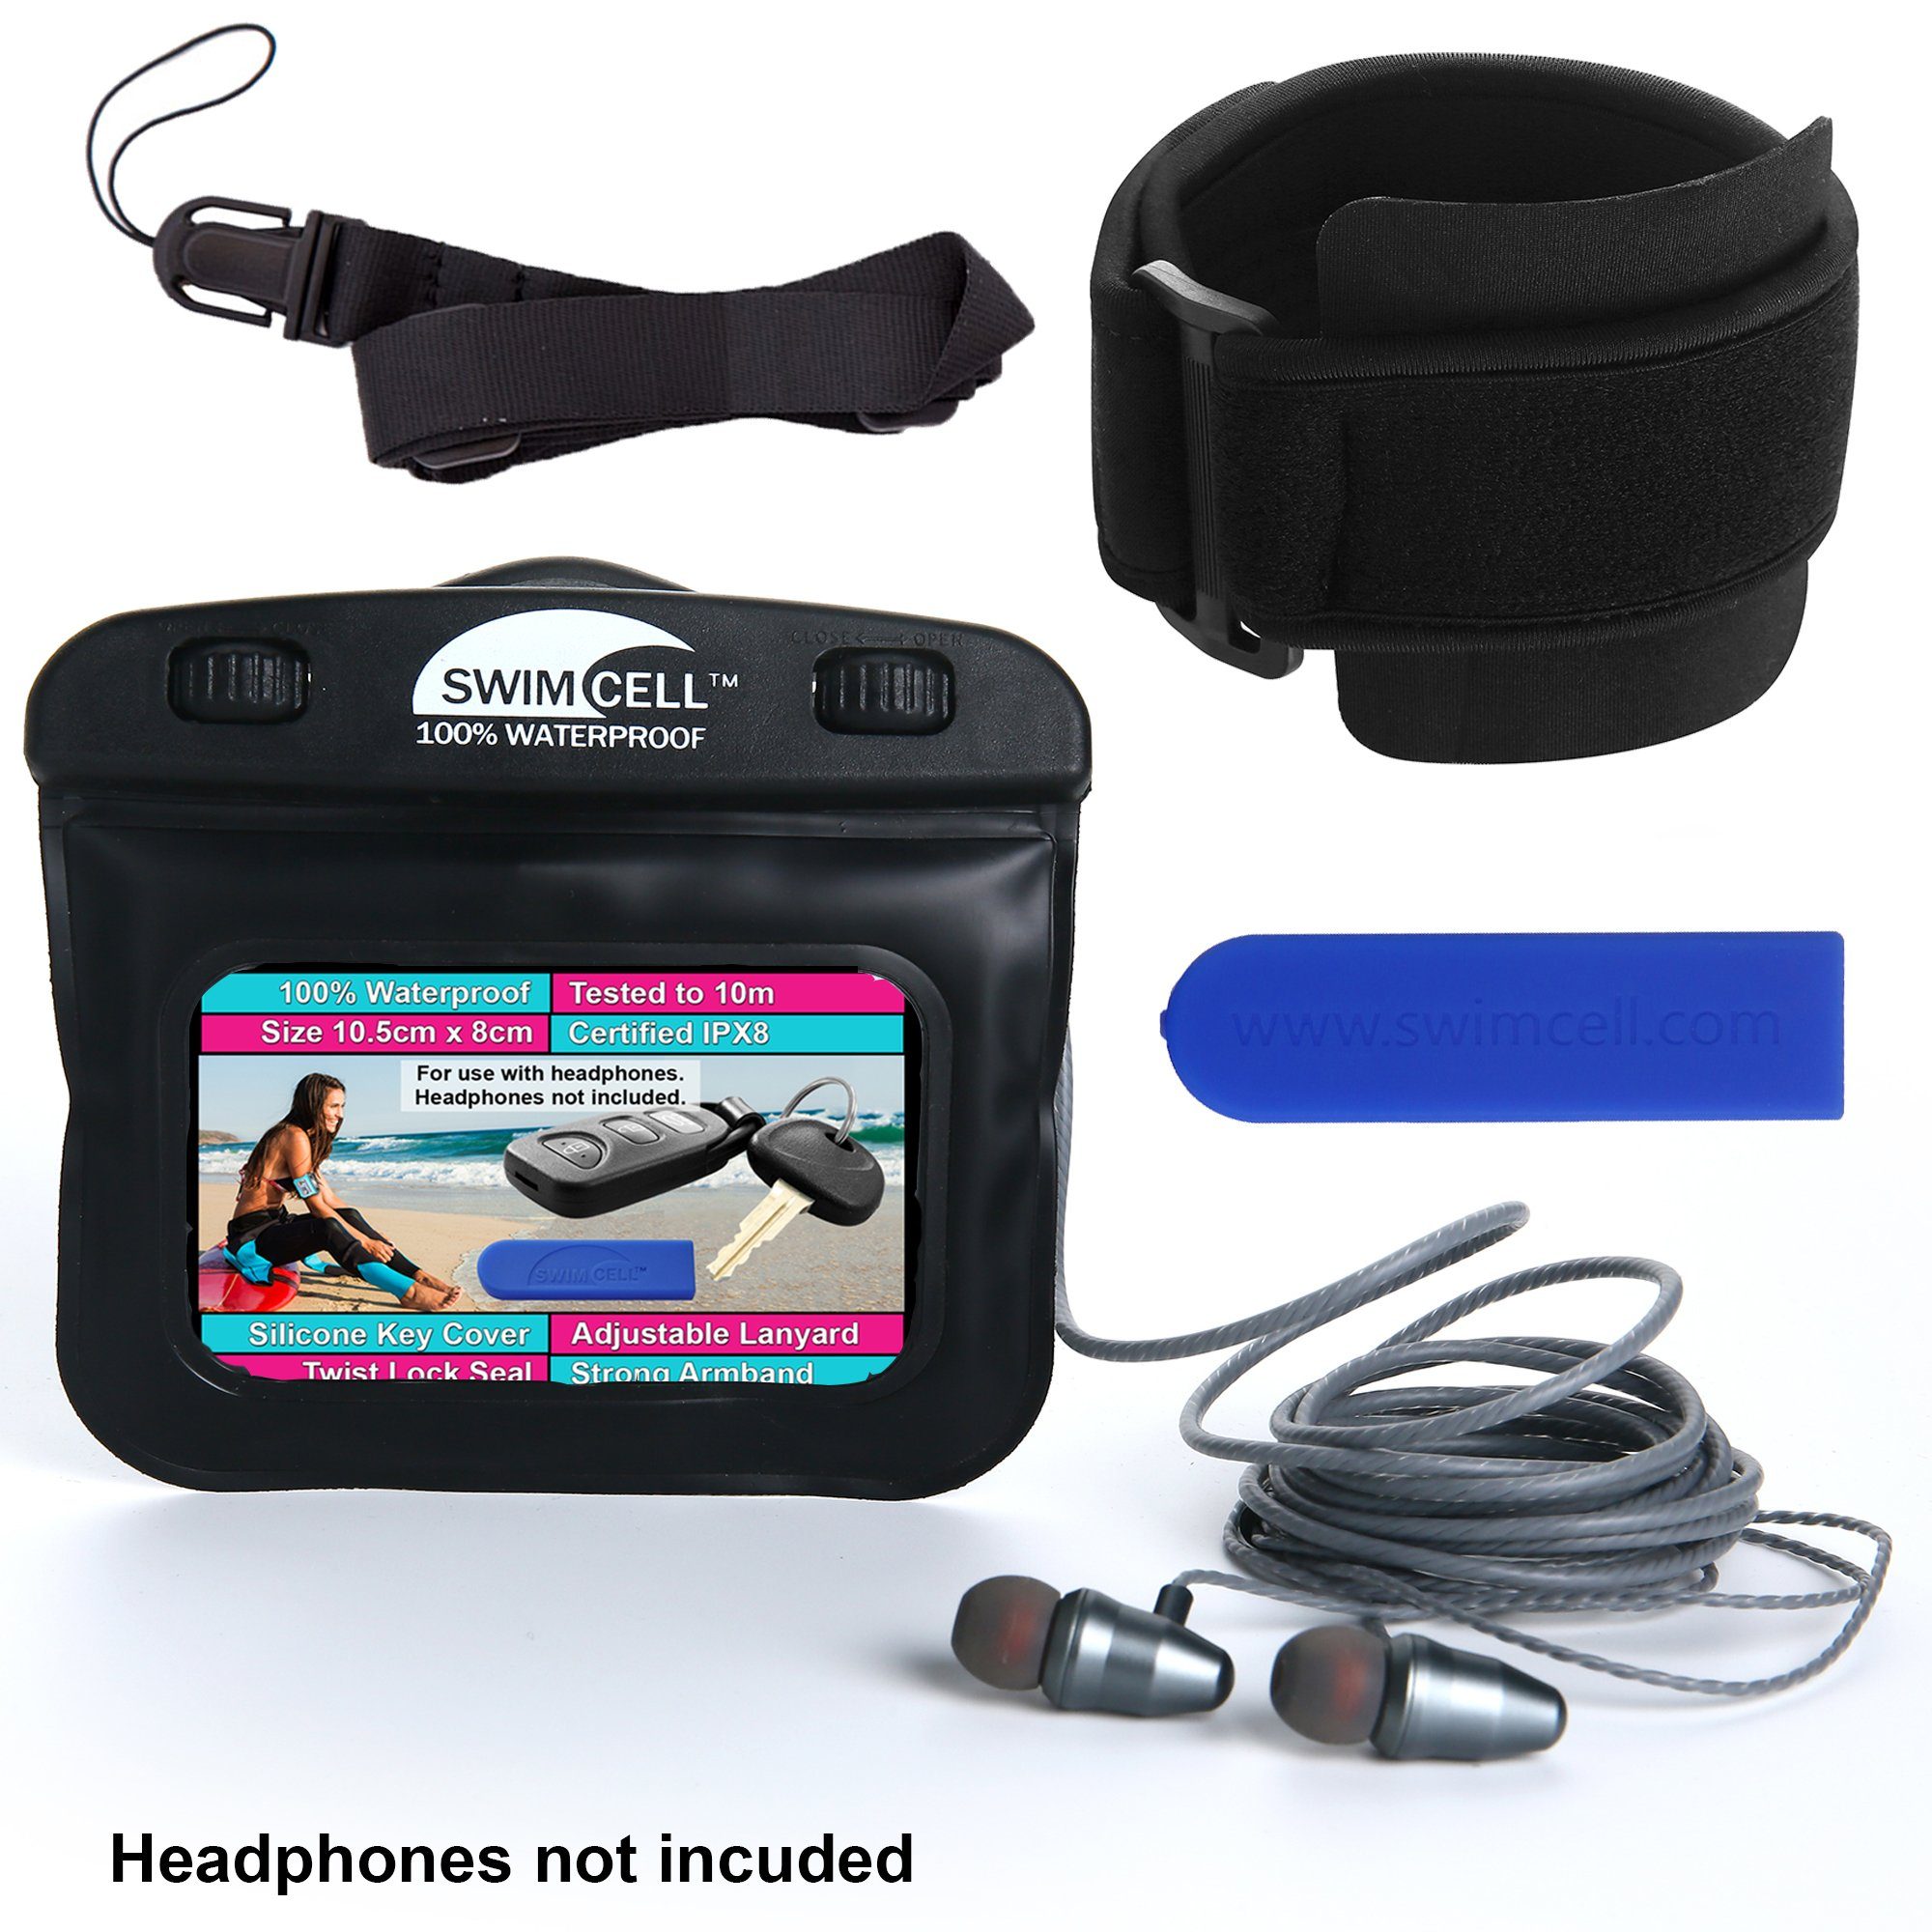 SwimCell MP3 Player waterproof case